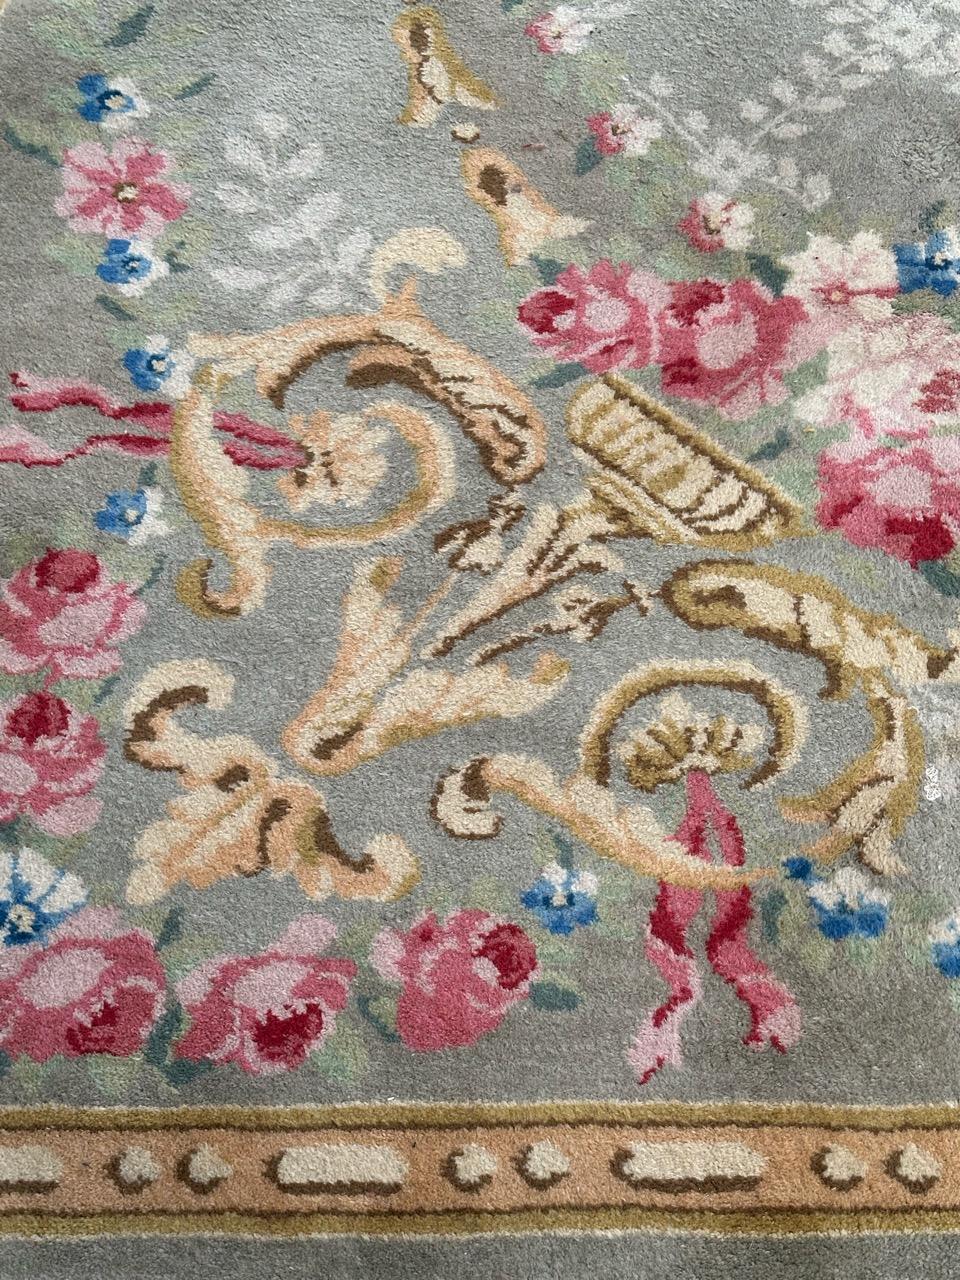 Pretty mid 20th century French Aubusson rug with very beautiful floral design and nice colours with a light green background, pink, yellow, green, blue, brown and white, entirely and finely hand knotted with wool on cotton foundation.
The top green